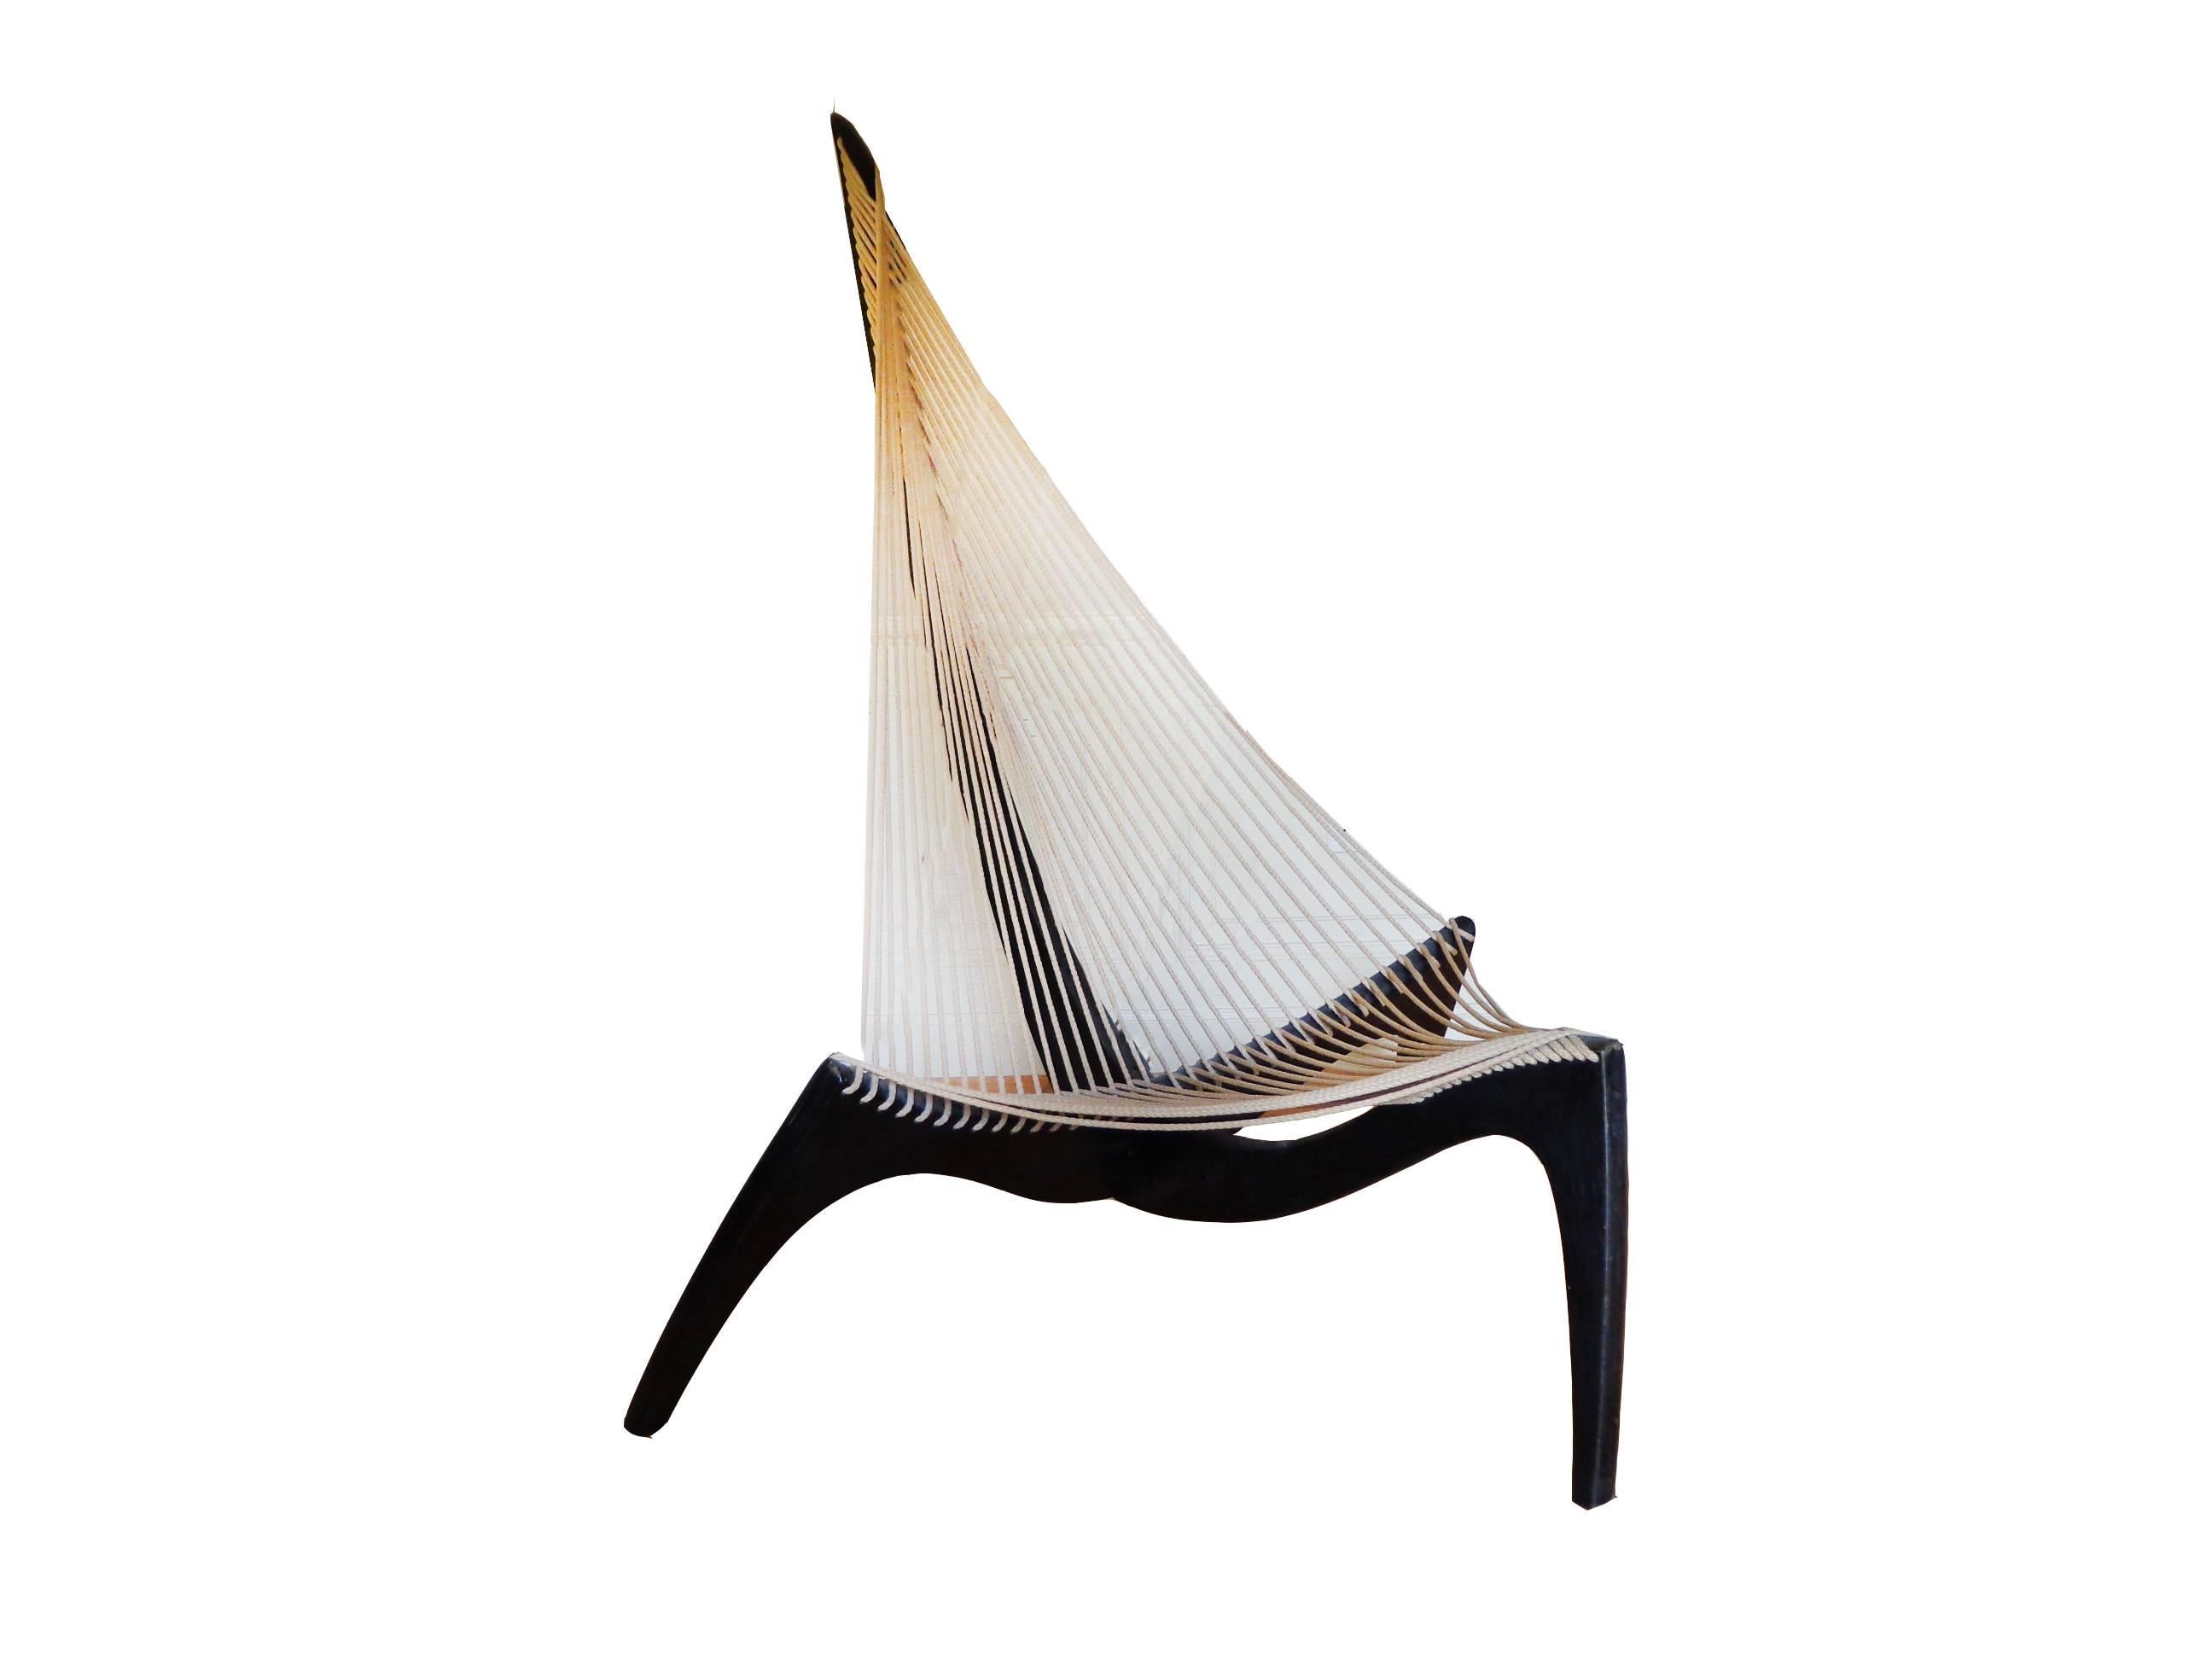 Offerd by Zitzo, Amsterdam this early Harp chair shape gives it the name Harp chair. Its three wooden legs have curves like those of an old Viking ship. The legs are joined in the centre with a single metal bolt, providing for a knockdown feature.